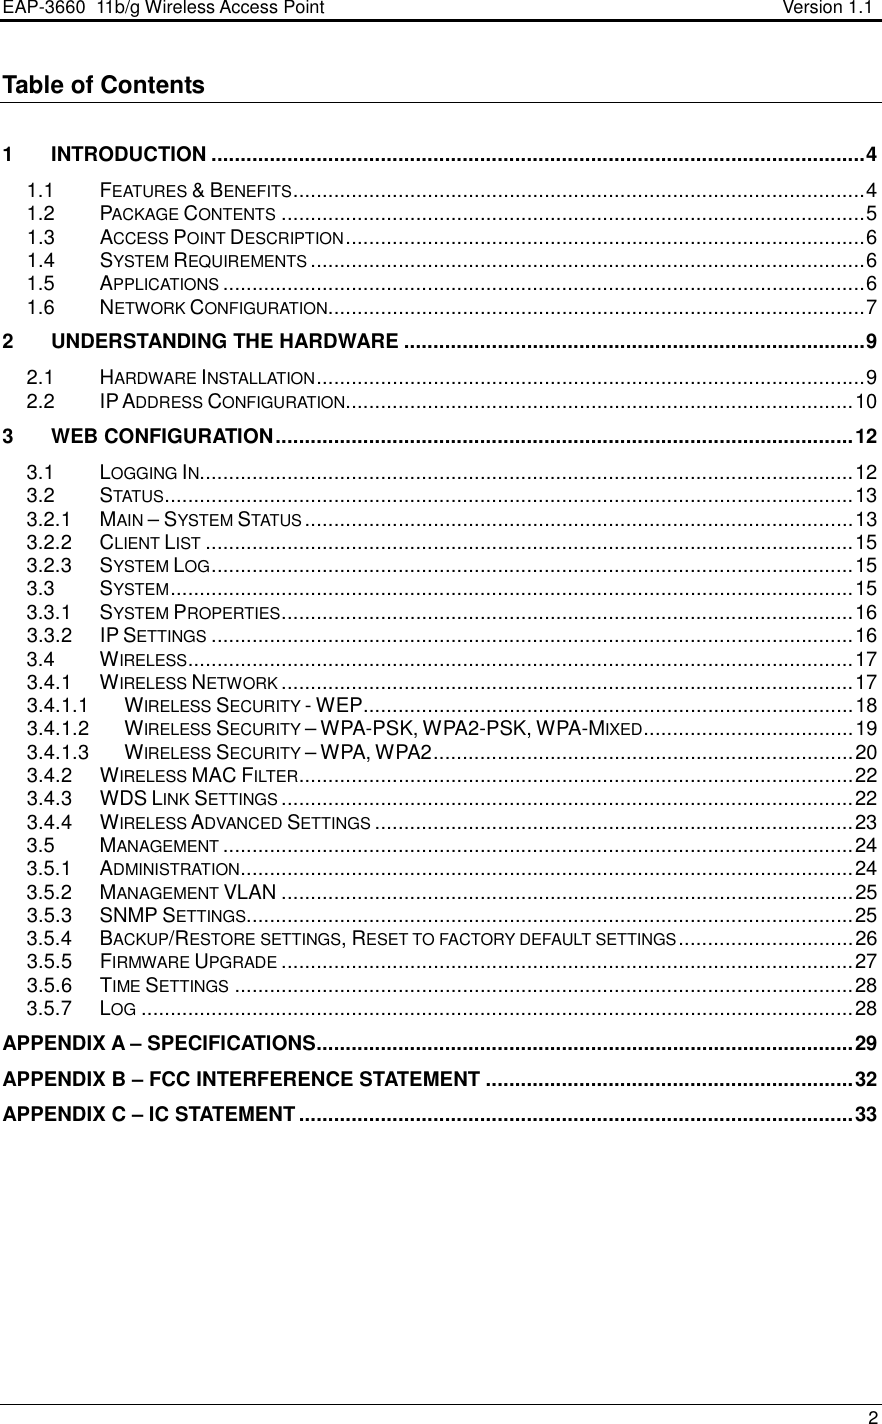 EAP-3660  11b/g Wireless Access Point                                                           Version 1.1    2  Table of Contents  1 INTRODUCTION ................................................................................................................4 1.1  FEATURES &amp; BENEFITS..................................................................................................4 1.2  PACKAGE CONTENTS....................................................................................................5 1.3  ACCESS POINT DESCRIPTION.........................................................................................6 1.4  SYSTEM REQUIREMENTS...............................................................................................6 1.5  APPLICATIONS..............................................................................................................6 1.6  NETWORK CONFIGURATION............................................................................................7 2 UNDERSTANDING THE HARDWARE ...............................................................................9 2.1  HARDWARE INSTALLATION..............................................................................................9 2.2  IP ADDRESS CONFIGURATION.......................................................................................10 3 WEB CONFIGURATION...................................................................................................12 3.1  LOGGING IN................................................................................................................12 3.2  STATUS......................................................................................................................13 3.2.1  MAIN – SYSTEM STATUS..............................................................................................13 3.2.2  CLIENT LIST...............................................................................................................15 3.2.3  SYSTEM LOG..............................................................................................................15 3.3  SYSTEM.....................................................................................................................15 3.3.1  SYSTEM PROPERTIES..................................................................................................16 3.3.2  IP SETTINGS..............................................................................................................16 3.4  WIRELESS..................................................................................................................17 3.4.1  WIRELESS NETWORK..................................................................................................17 3.4.1.1  WIRELESS SECURITY - WEP....................................................................................18 3.4.1.2  WIRELESS SECURITY – WPA-PSK, WPA2-PSK, WPA-MIXED....................................19 3.4.1.3  WIRELESS SECURITY – WPA, WPA2........................................................................20 3.4.2  WIRELESS MAC FILTER...............................................................................................22 3.4.3  WDS LINK SETTINGS..................................................................................................22 3.4.4  WIRELESS ADVANCED SETTINGS..................................................................................23 3.5  MANAGEMENT............................................................................................................24 3.5.1  ADMINISTRATION.........................................................................................................24 3.5.2  MANAGEMENT VLAN ..................................................................................................25 3.5.3  SNMP SETTINGS........................................................................................................25 3.5.4  BACKUP/RESTORE SETTINGS, RESET TO FACTORY DEFAULT SETTINGS..............................26 3.5.5  FIRMWARE UPGRADE..................................................................................................27 3.5.6  TIME SETTINGS..........................................................................................................28 3.5.7  LOG..........................................................................................................................28 APPENDIX A – SPECIFICATIONS............................................................................................29 APPENDIX B – FCC INTERFERENCE STATEMENT ...............................................................32 APPENDIX C – IC STATEMENT ...............................................................................................33 